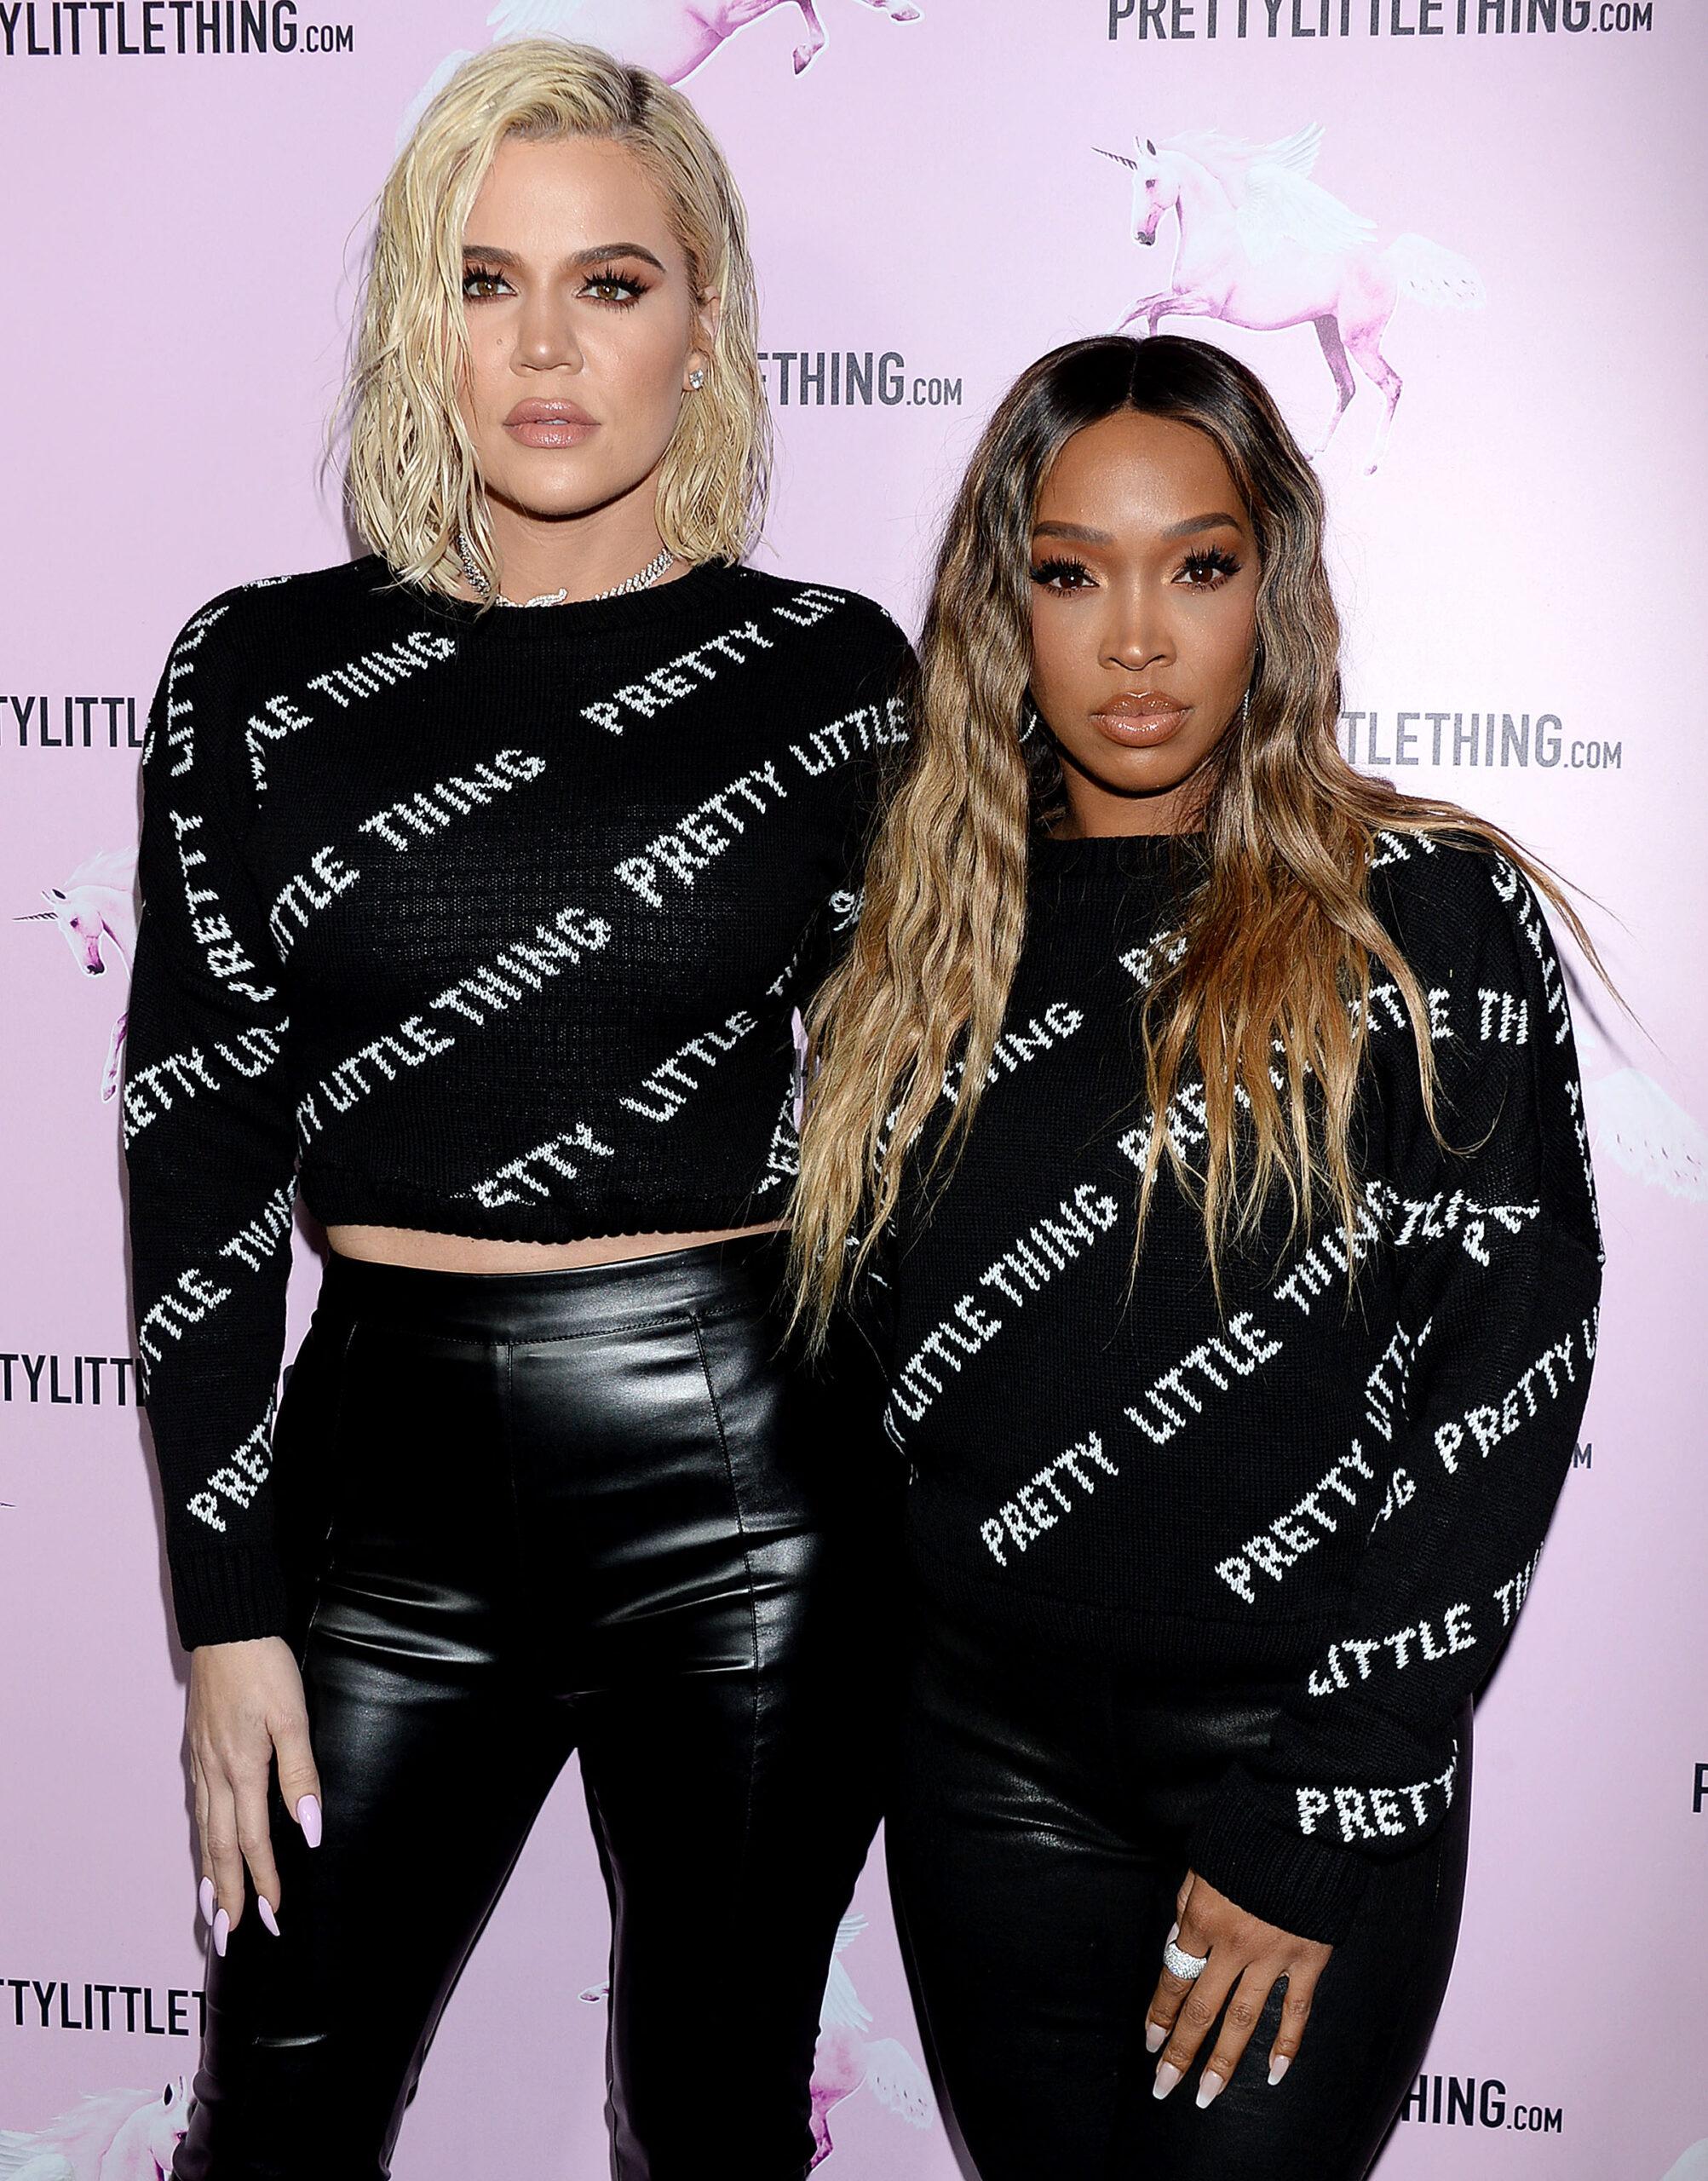 Khloe Kardashian and BFF Malika Haqq at the PrettyLittleThing LA Office Opening Party - Arrivals